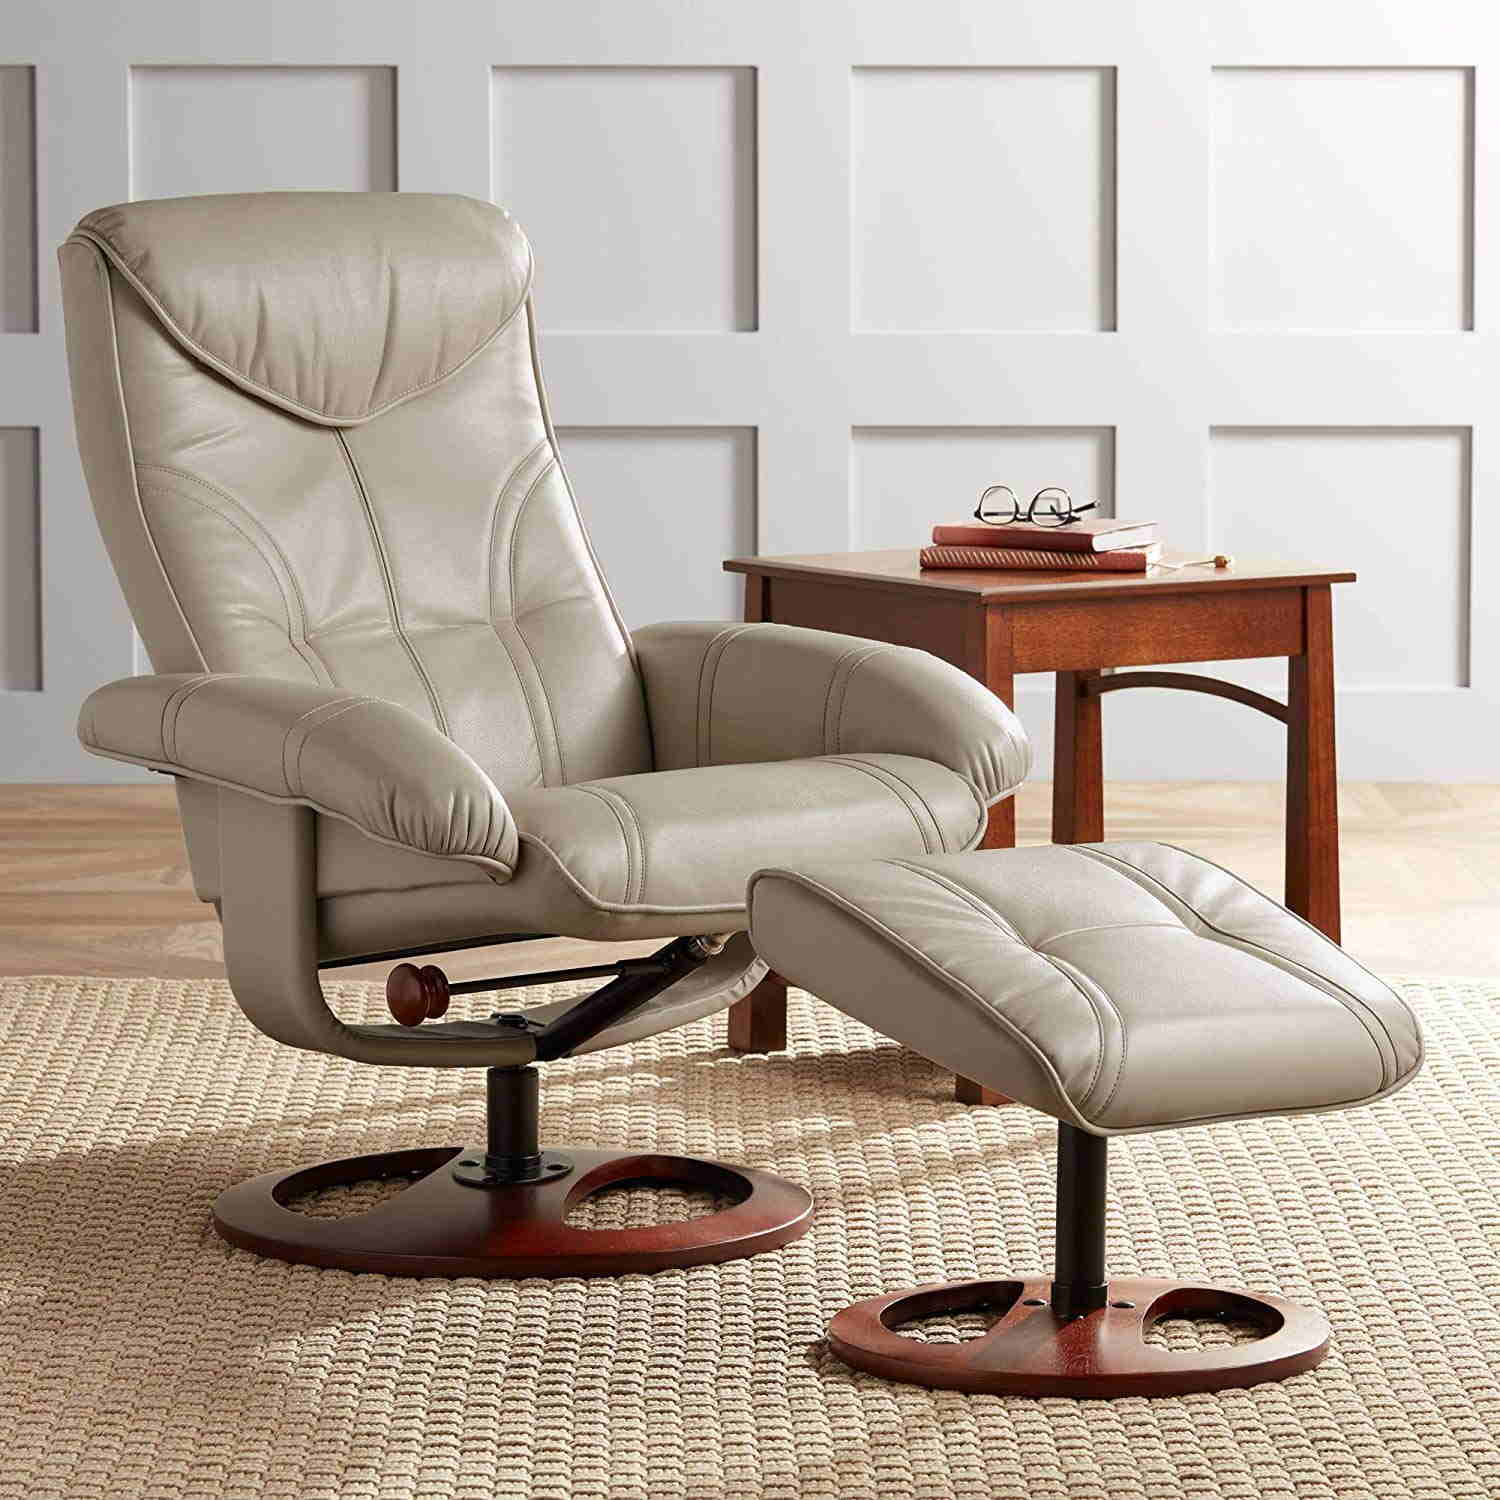 Top 10 Leather Recliner Chairs to buy in 2020 • Recliners Guide